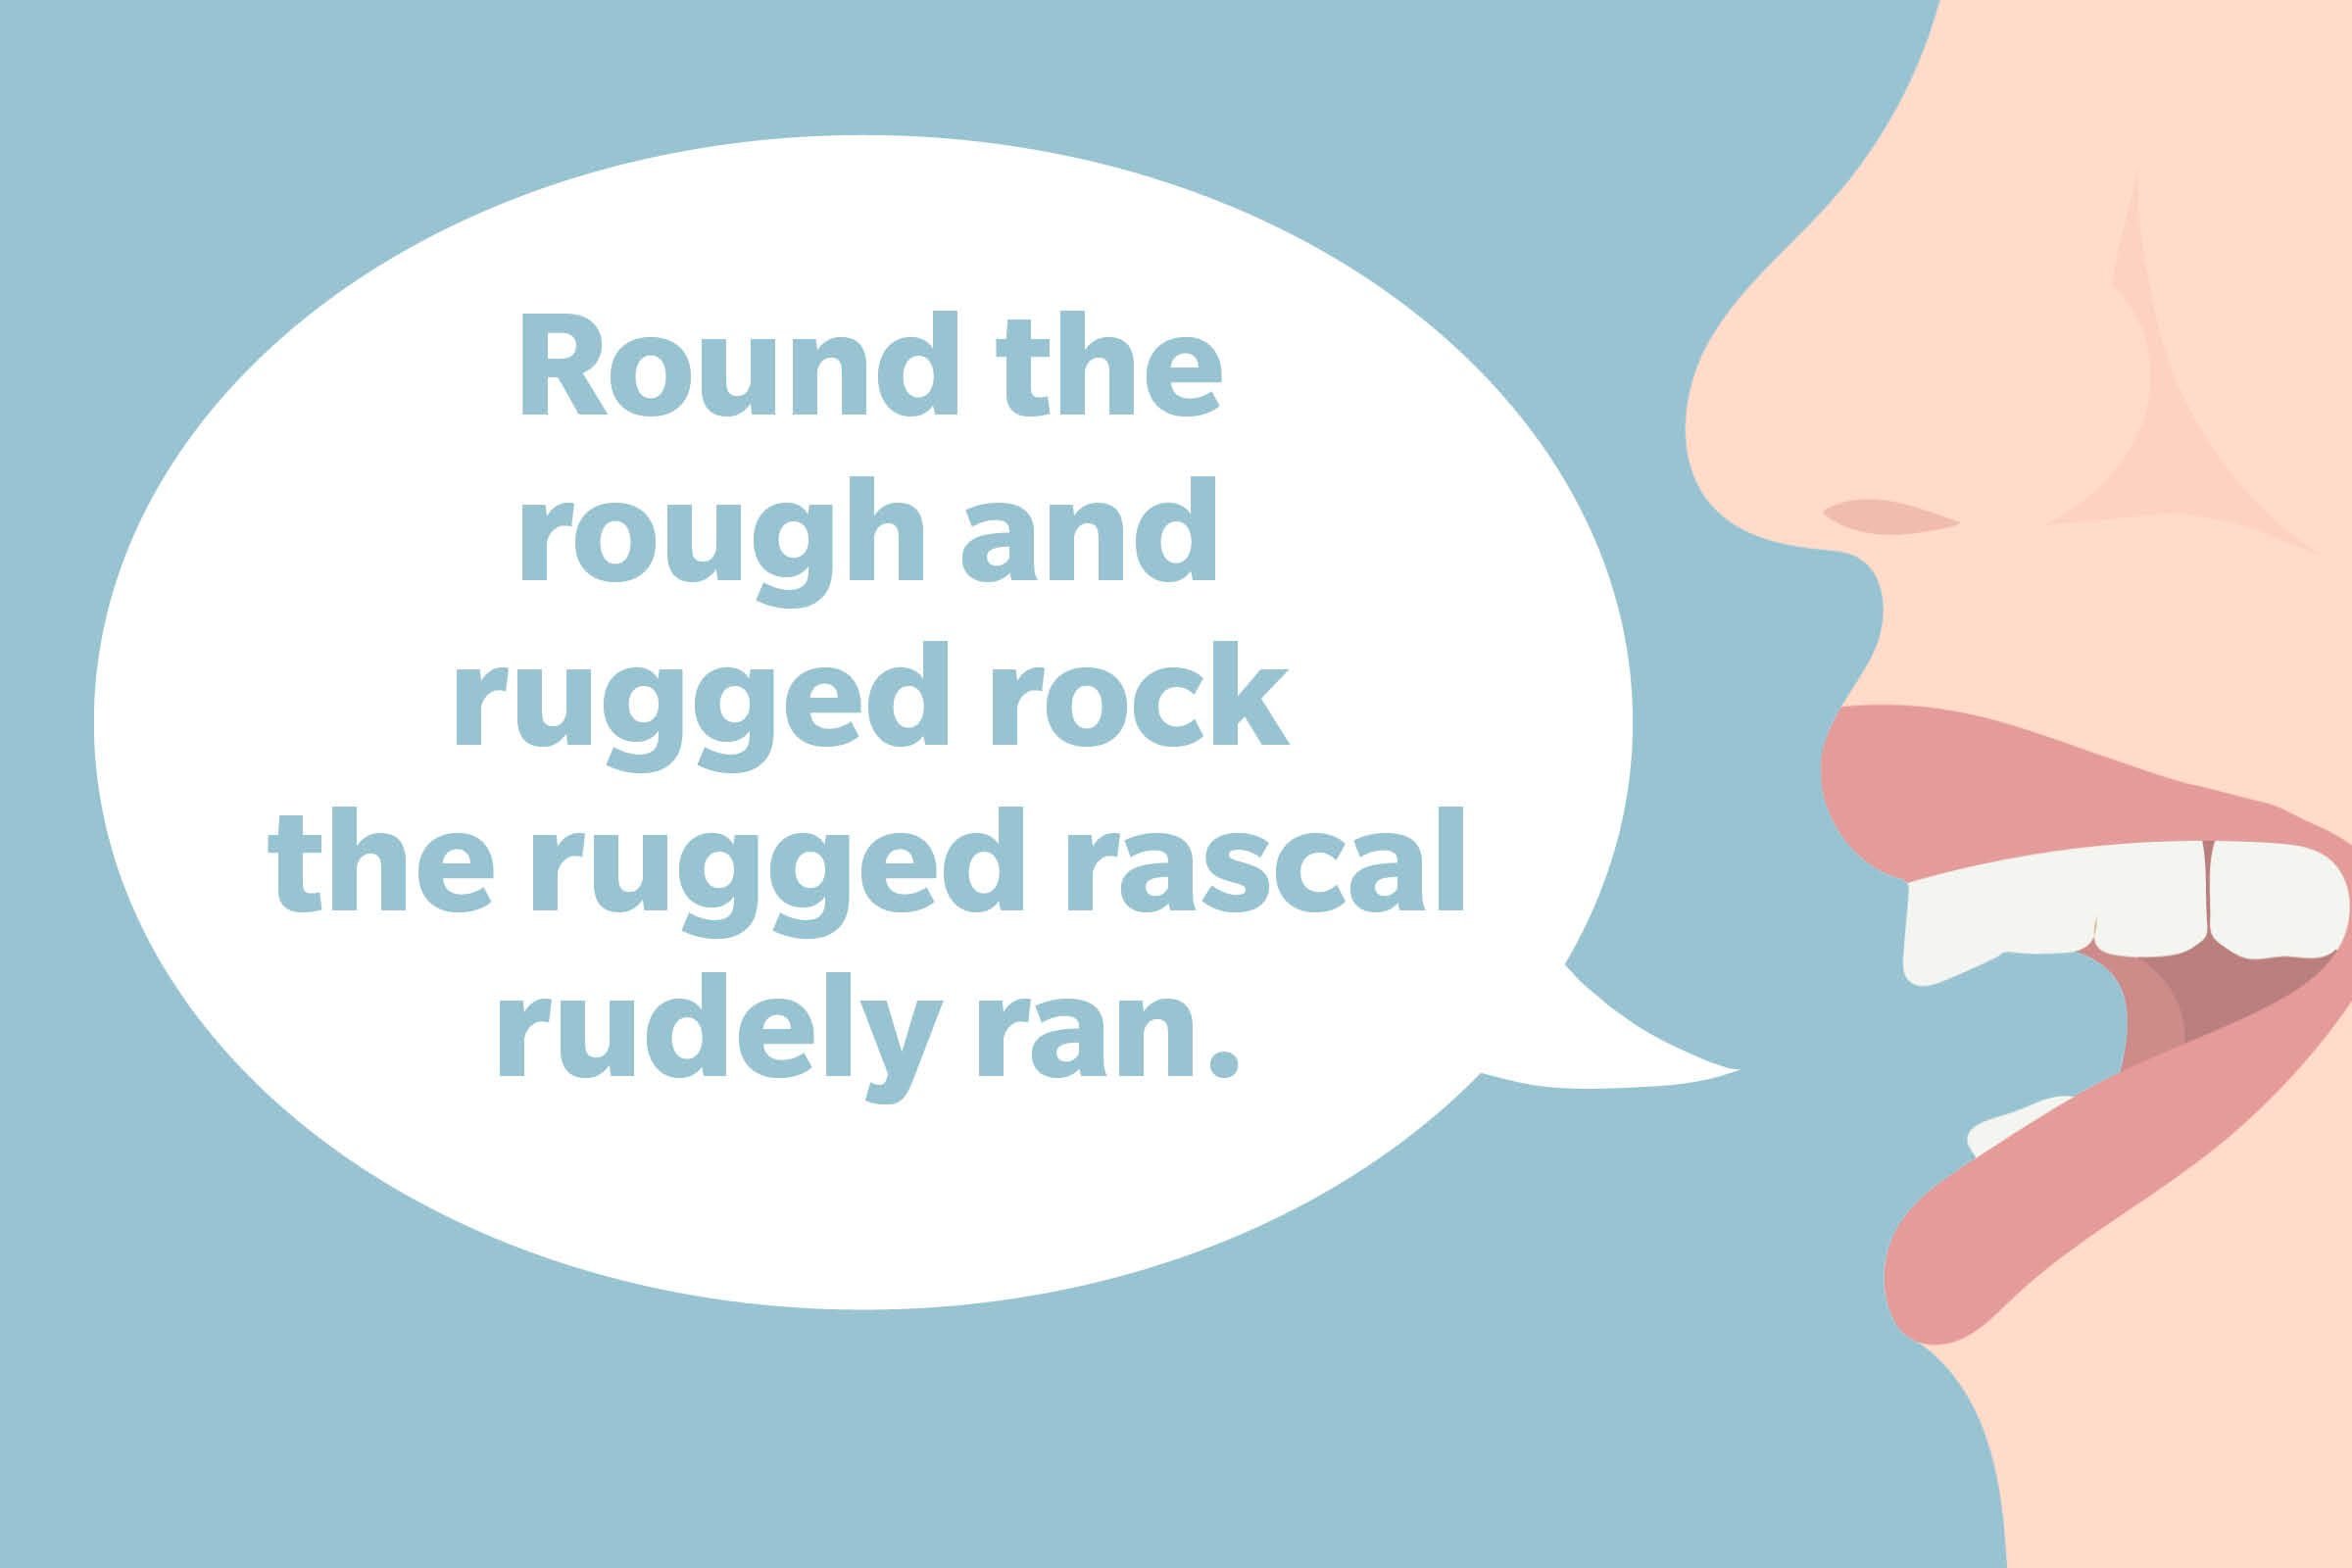 Tongue Twister: Round the rough and rugged rock the ragged rascal rudely ran.